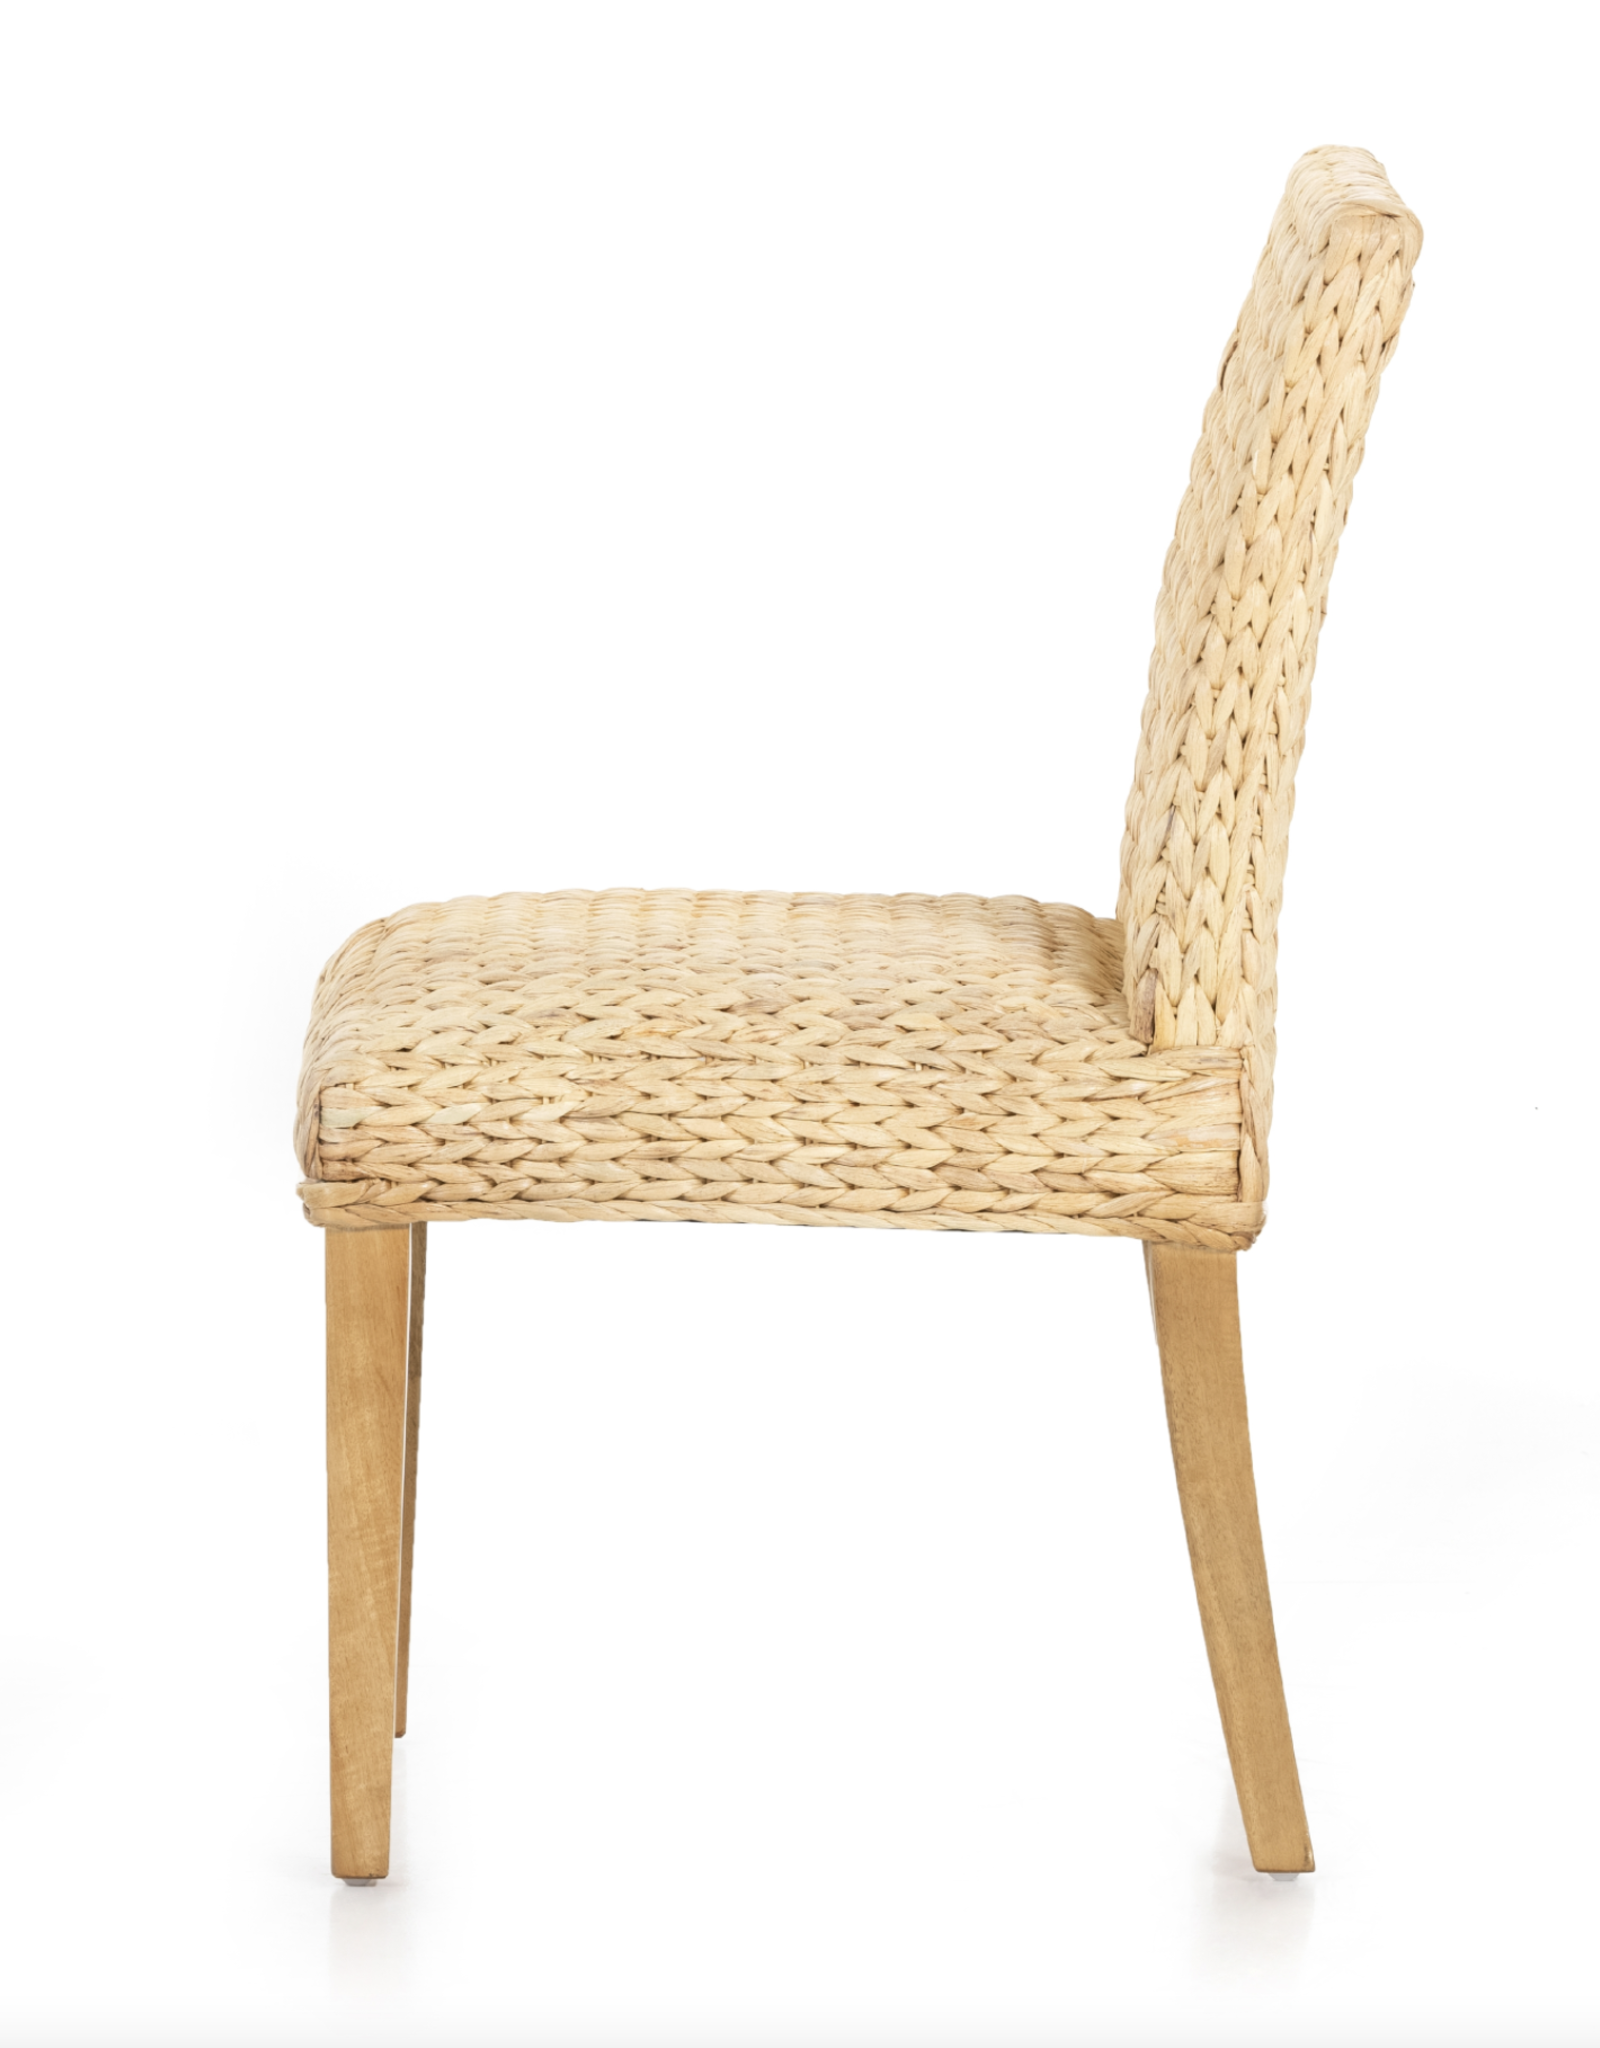 Annisa Dining Chair in Native